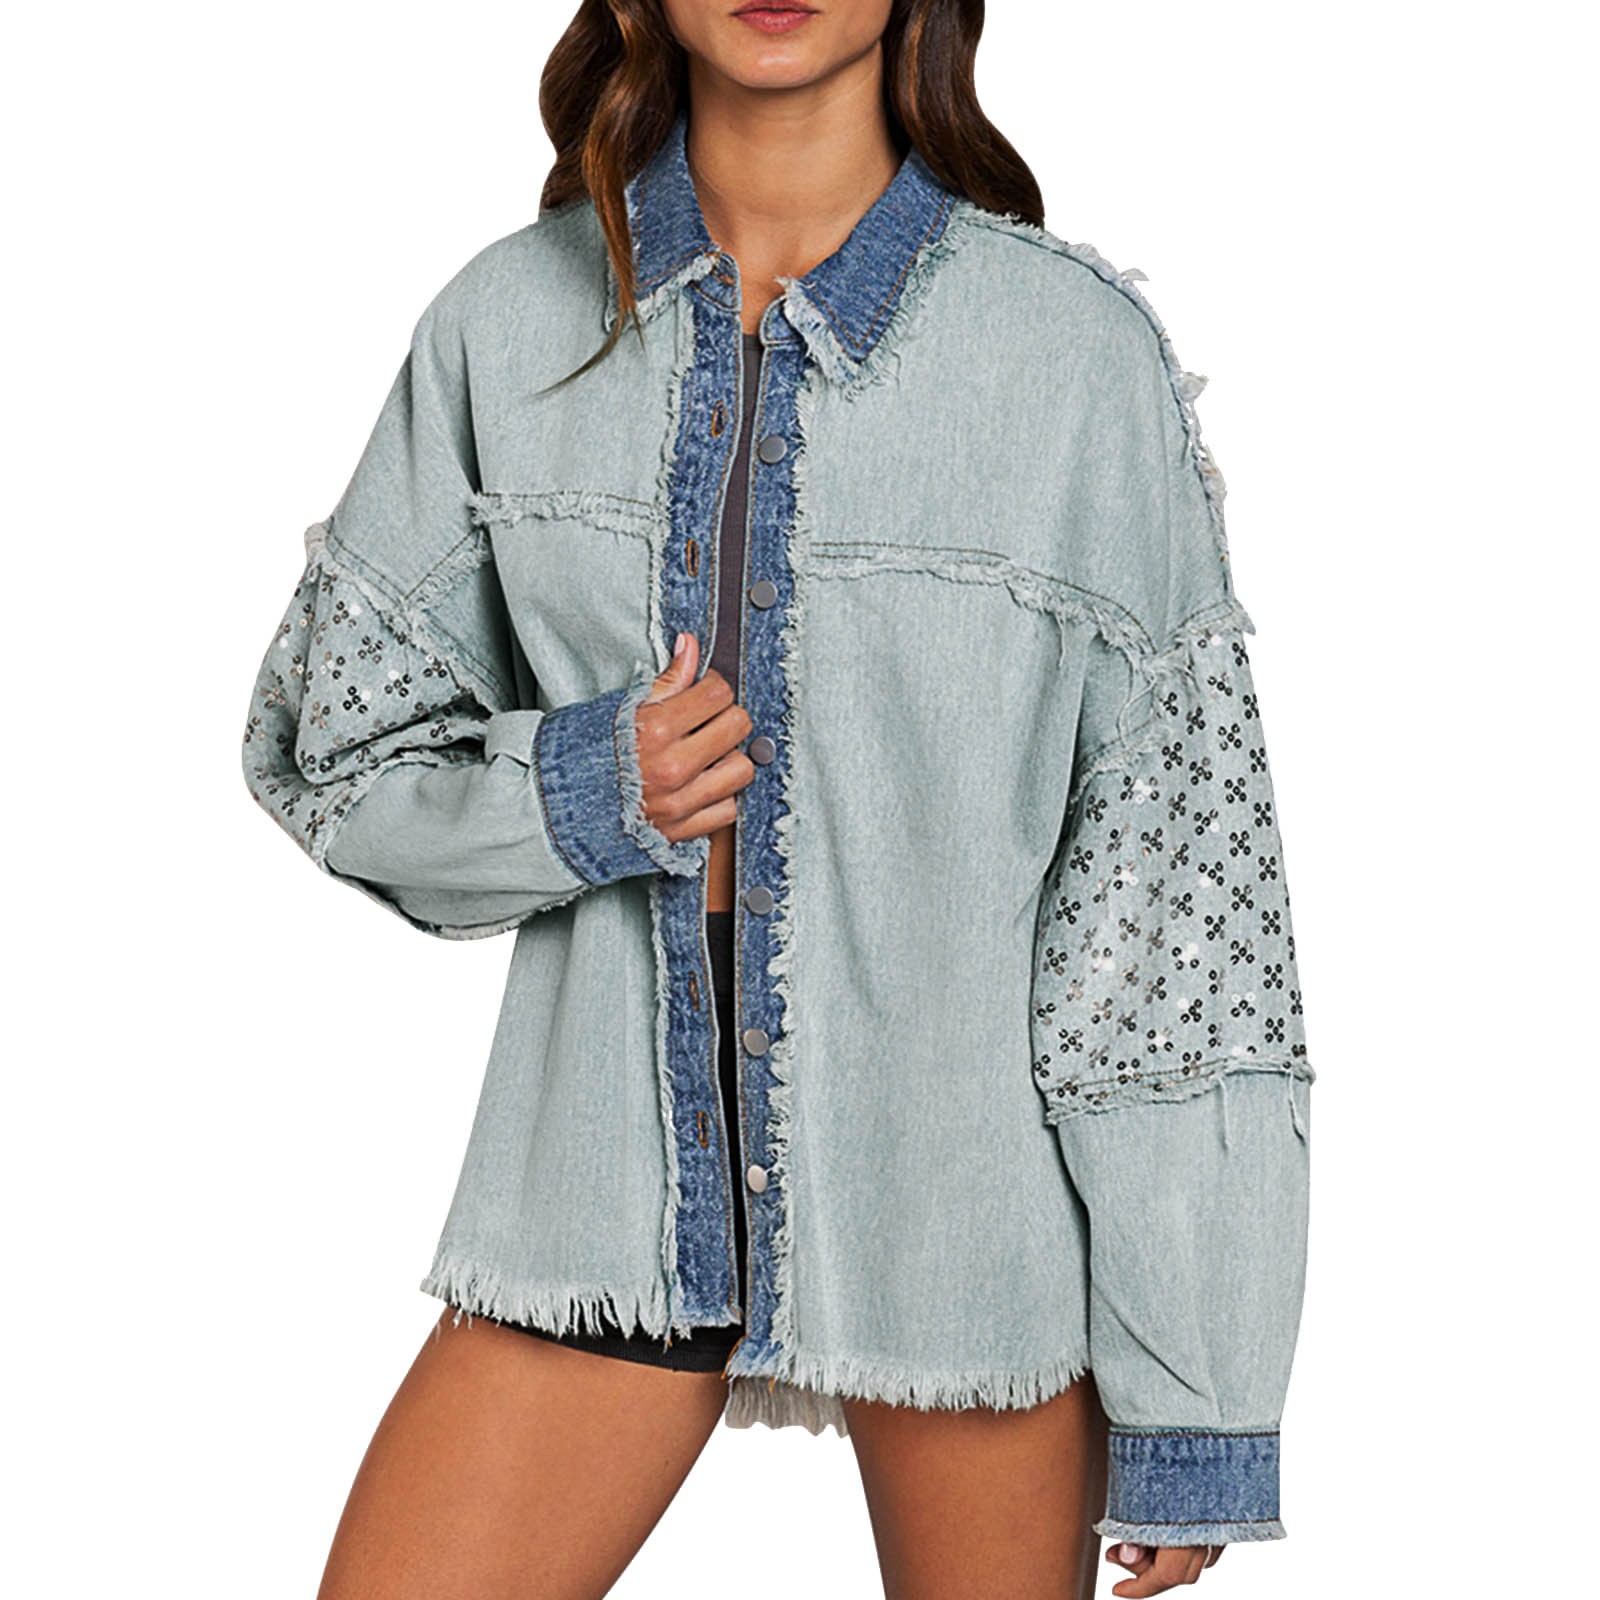 Lightweight Casual Jacket Women plus Size Womens Outdoor Vest Women's Basic Button Down Fitted Long Sleeves Denim Jean Jacket Womens Insulated Hunting Jacket - image 1 of 9